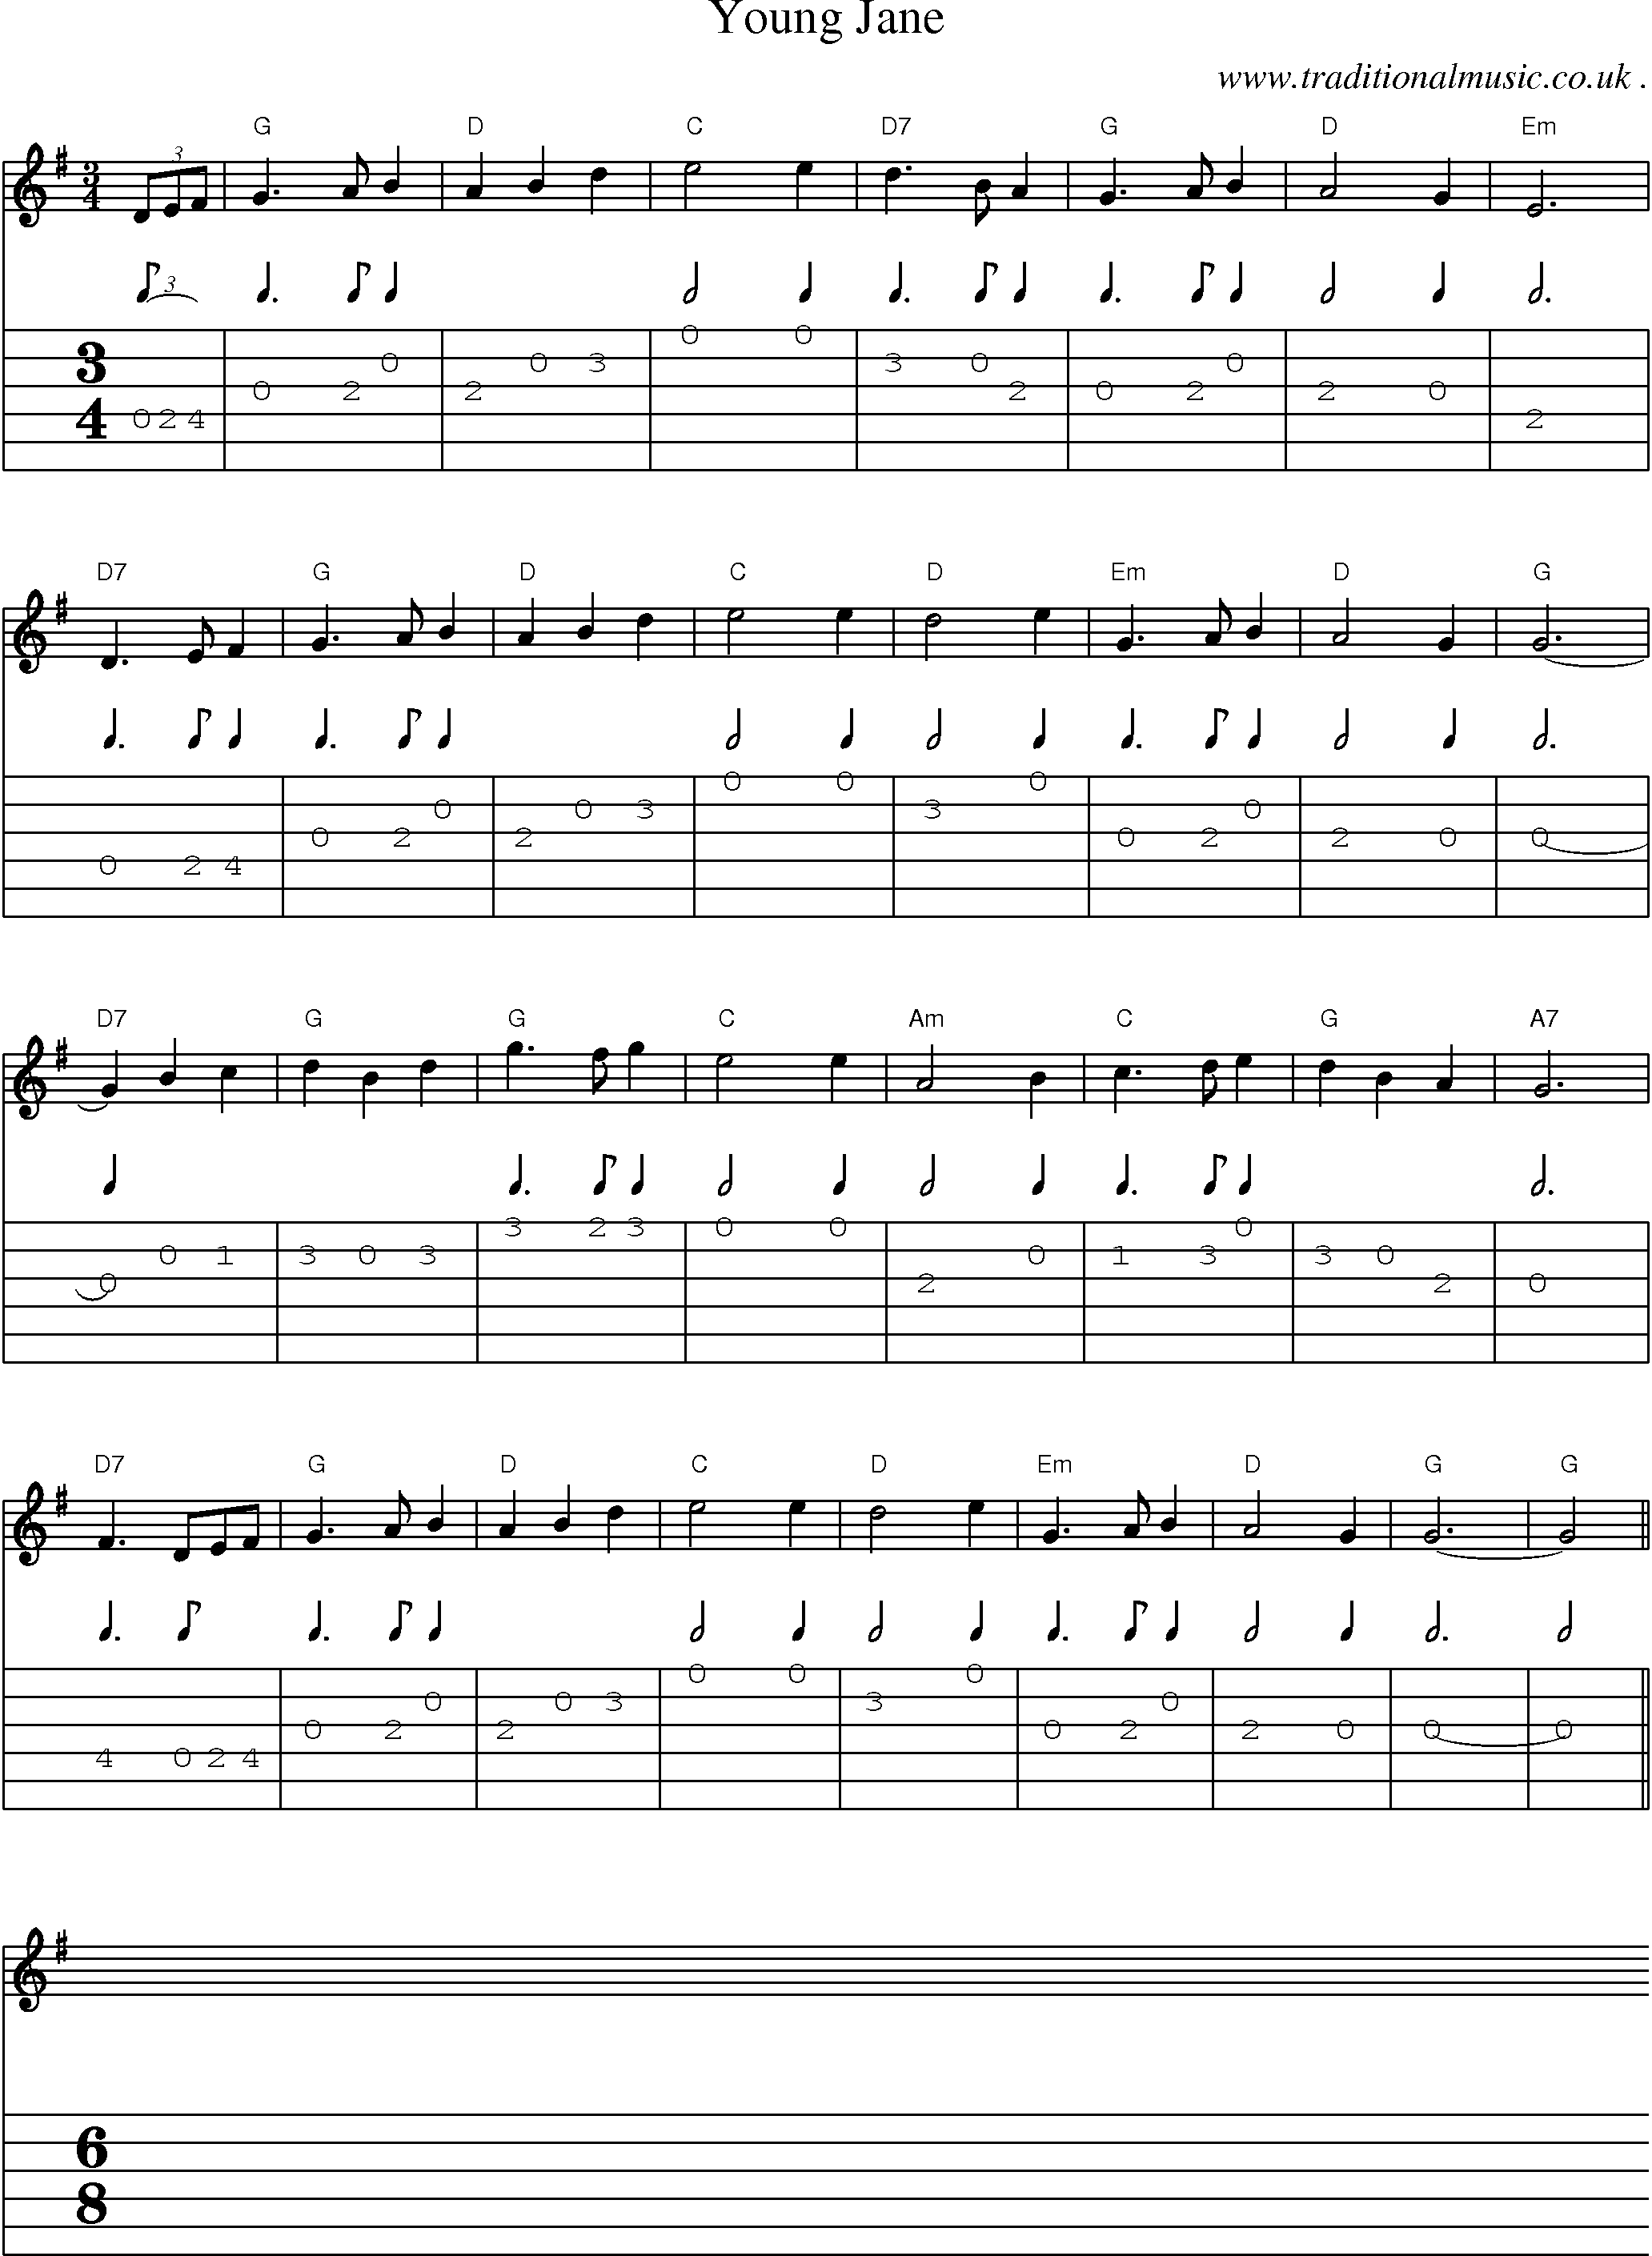 Sheet-Music and Guitar Tabs for Young Jane